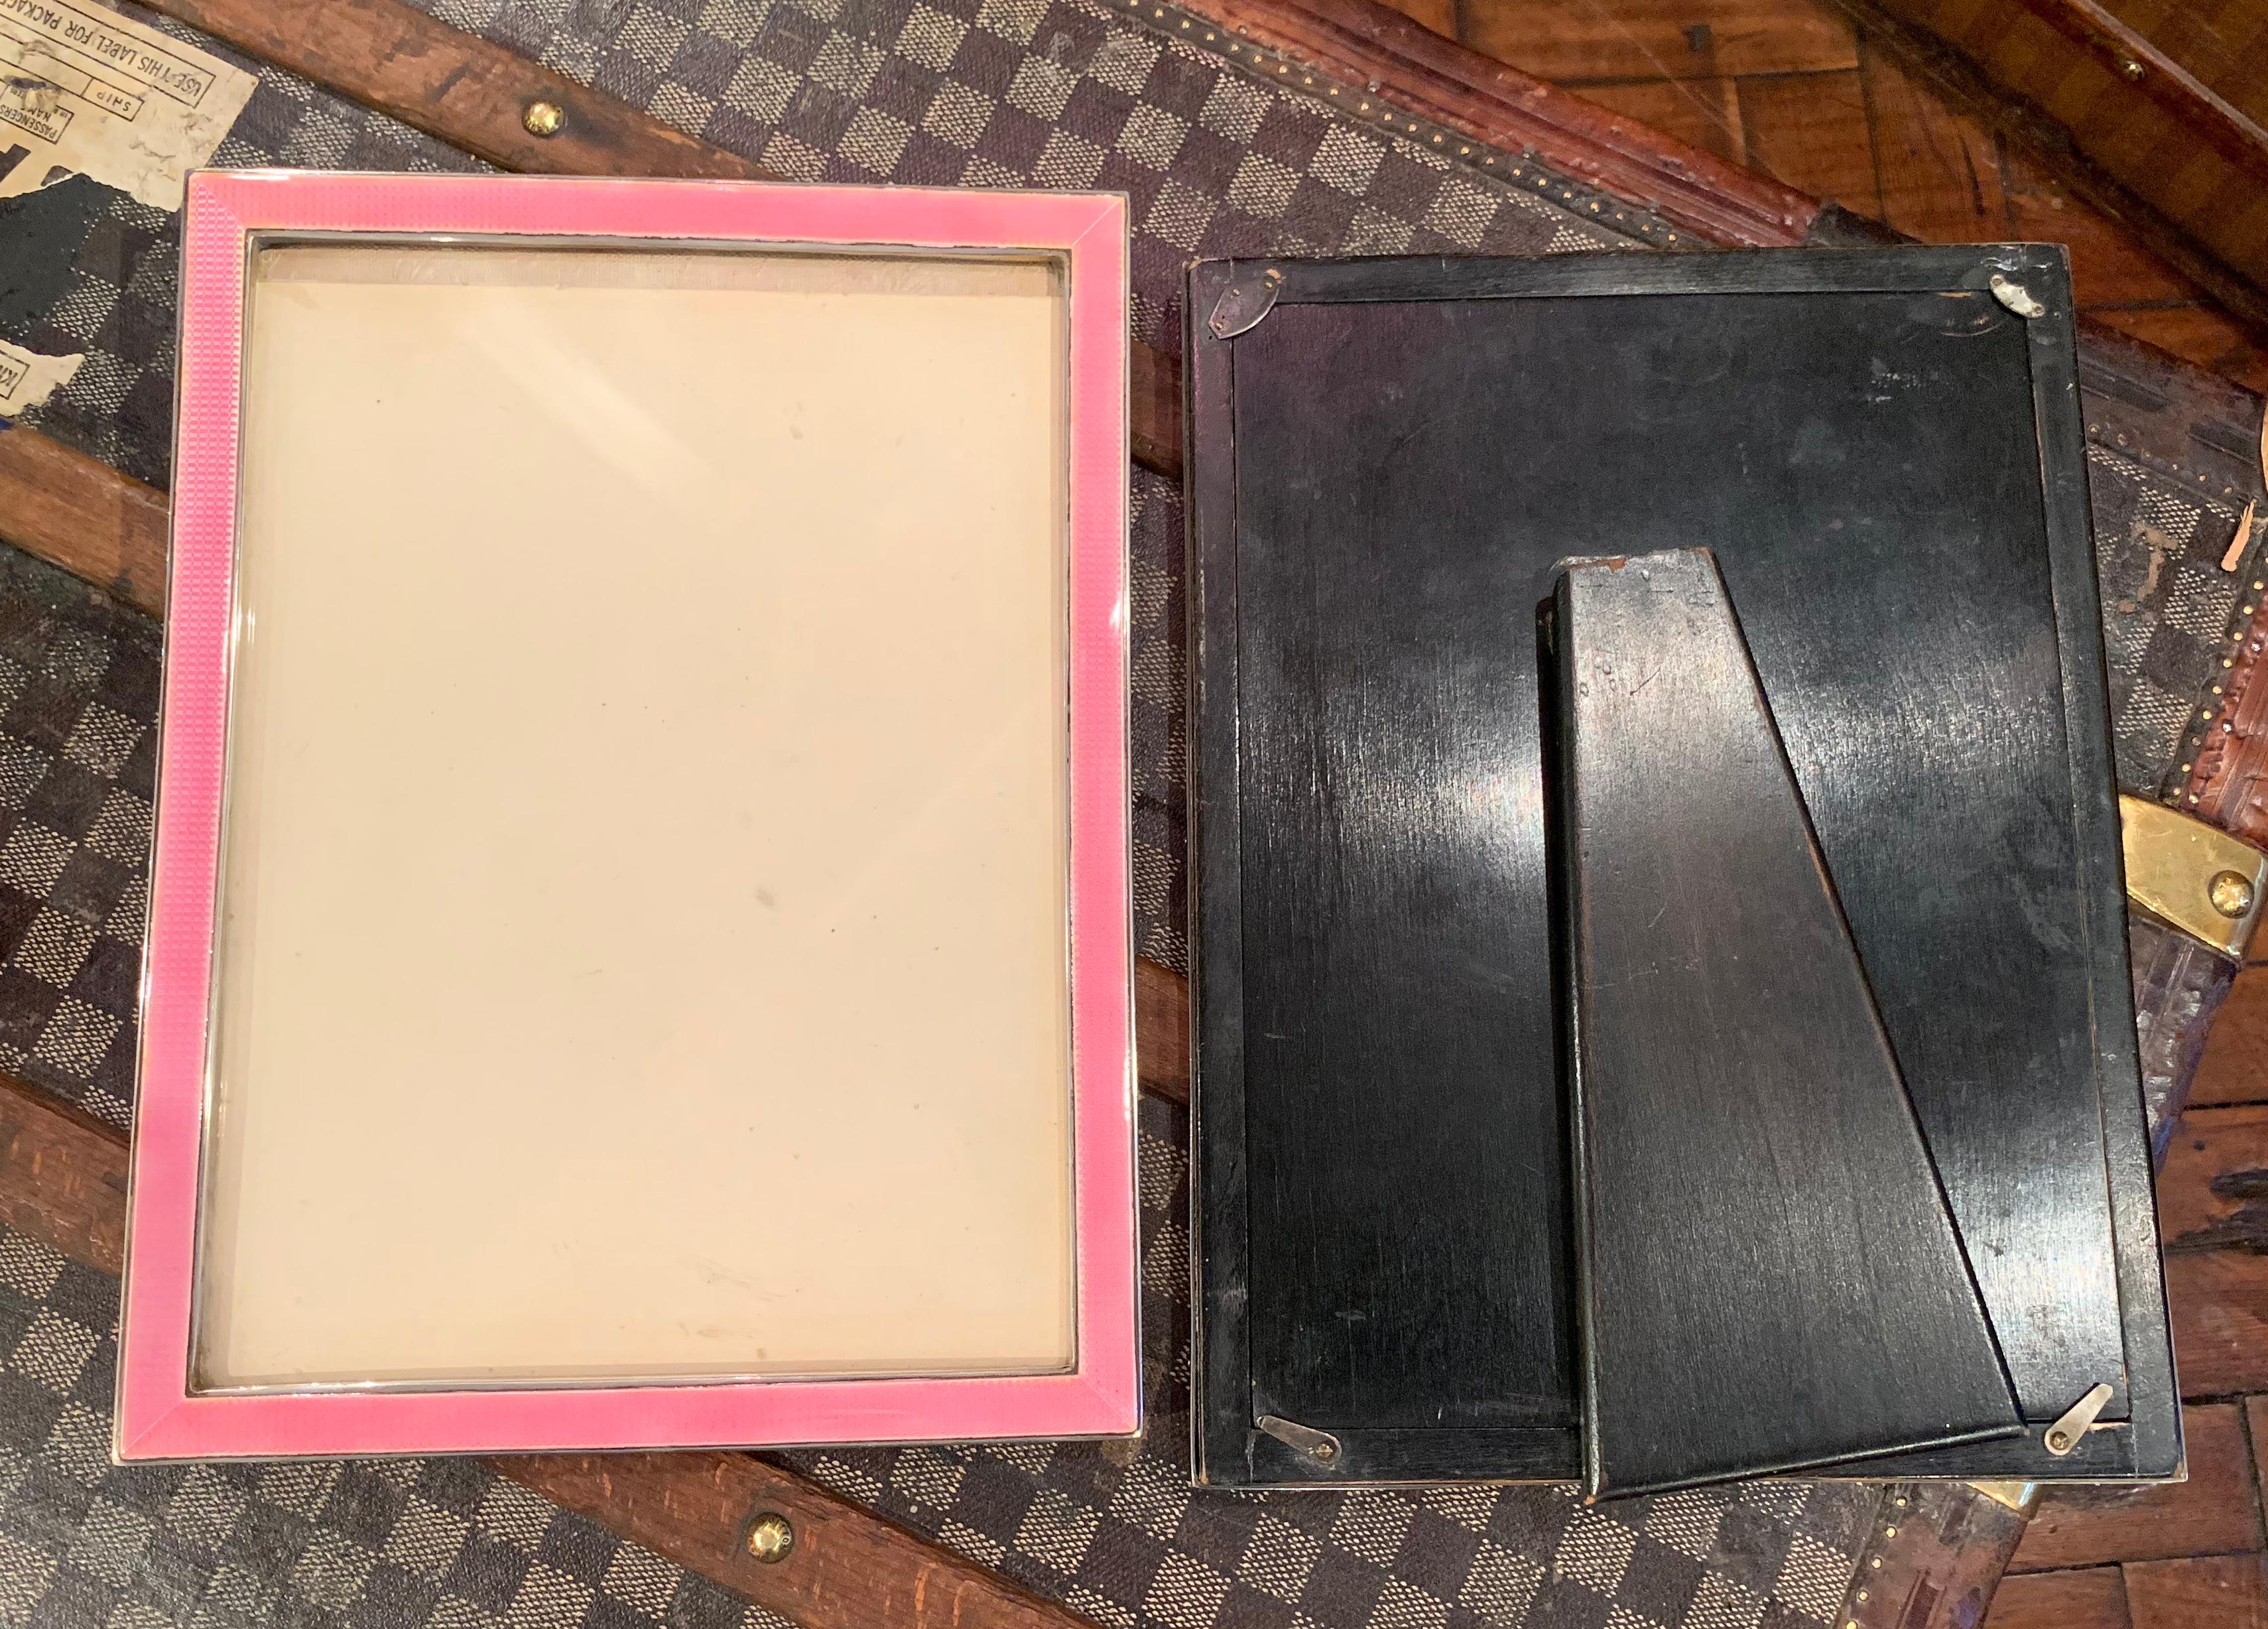 An exceptional and extremely large pair of sterling silver and baby pink Guilloche enamel Art Deco photograph frames.

Both frames having ebony wooden backs. Makers marks are rubbed on both frames, but each is hallmarked for Birmingham